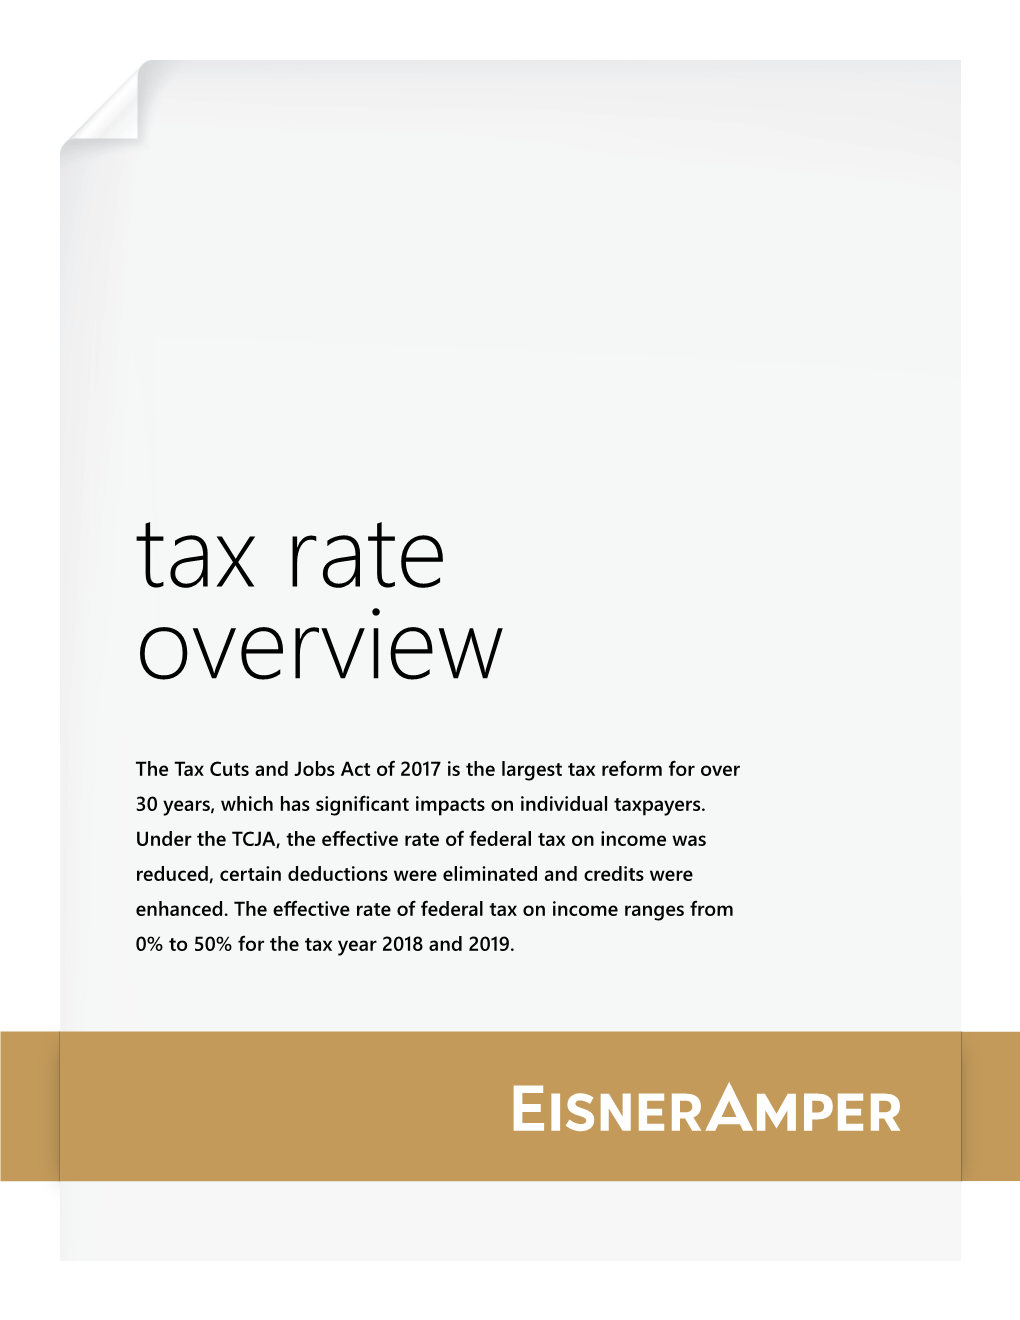 Tax Rate Overview